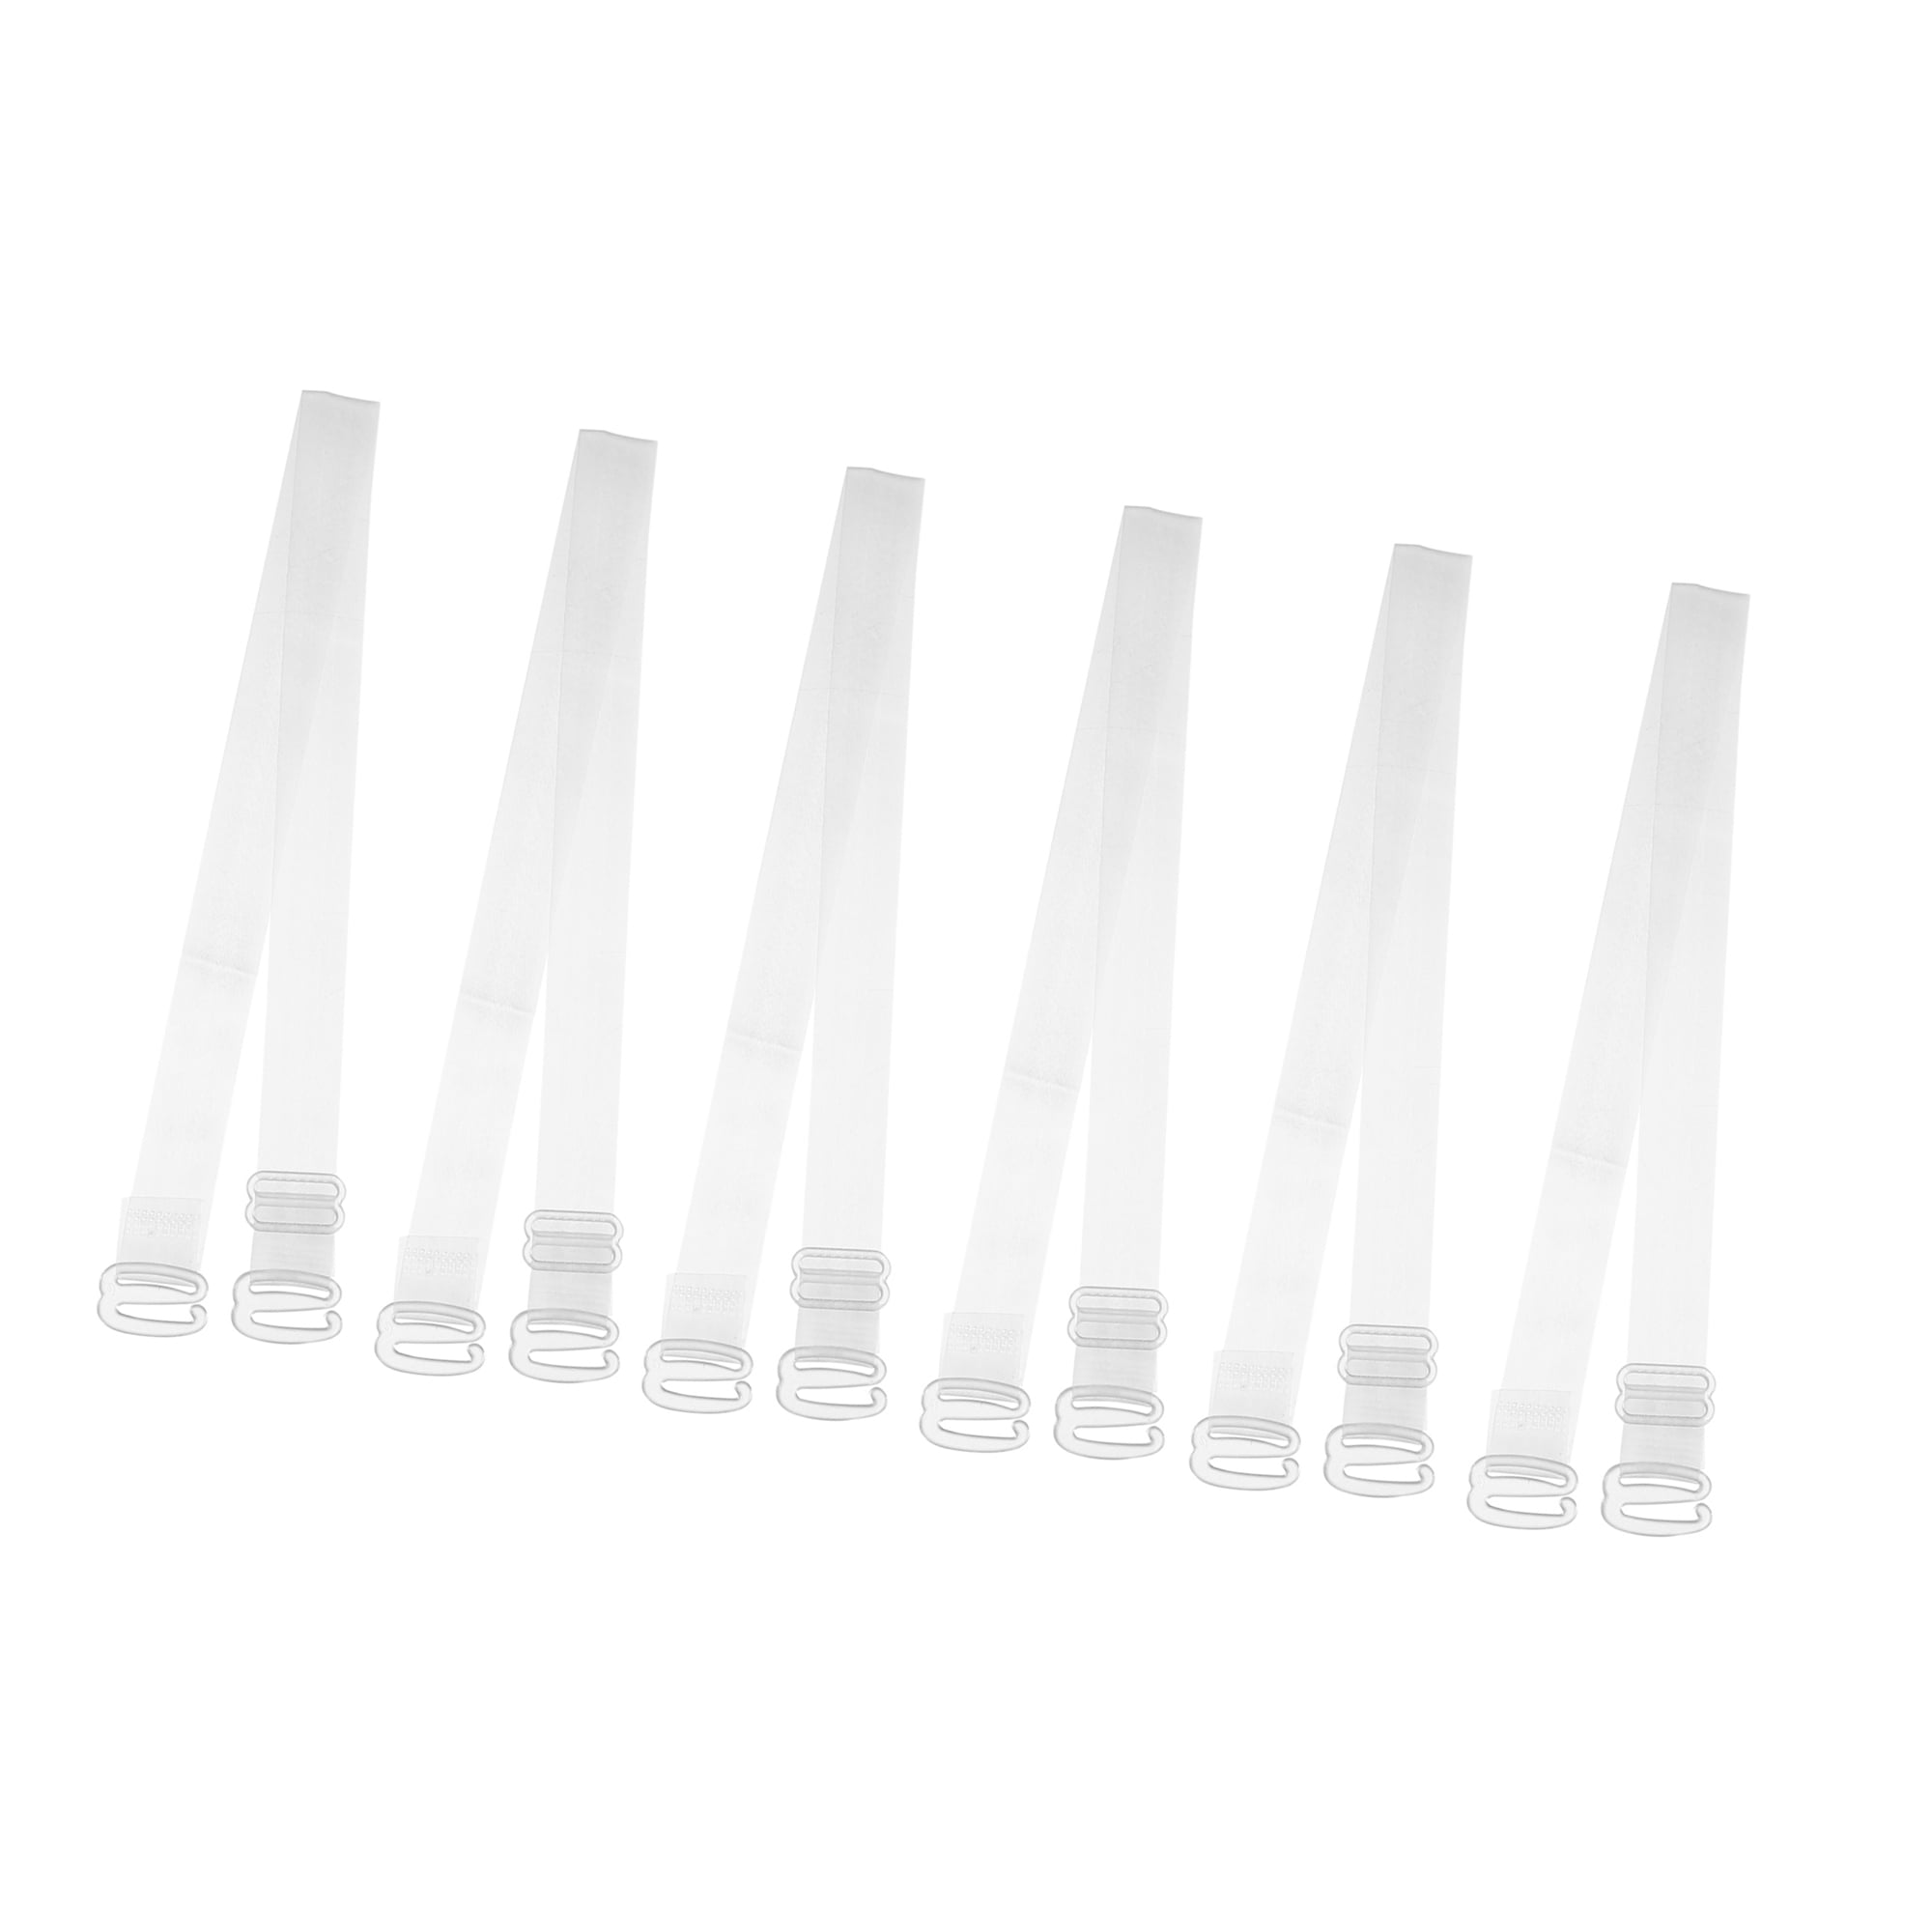 D-GROEE Clear Bra Straps, 3-Pairs Invisible Non-Slip Adjustable Bra Straps  for Strapless Bra